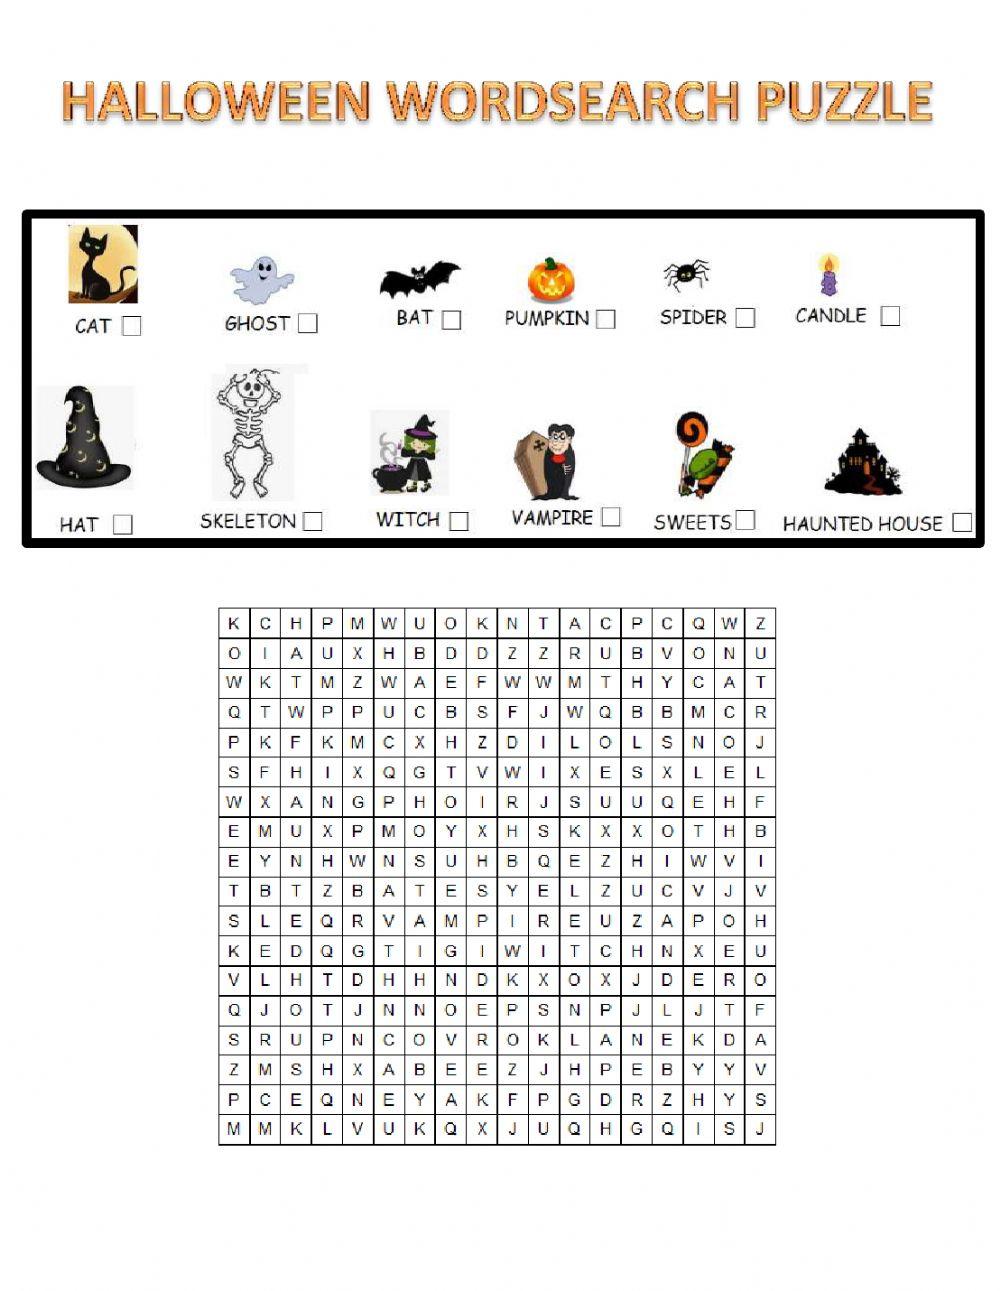 Halloween Wordsearch Puzzle